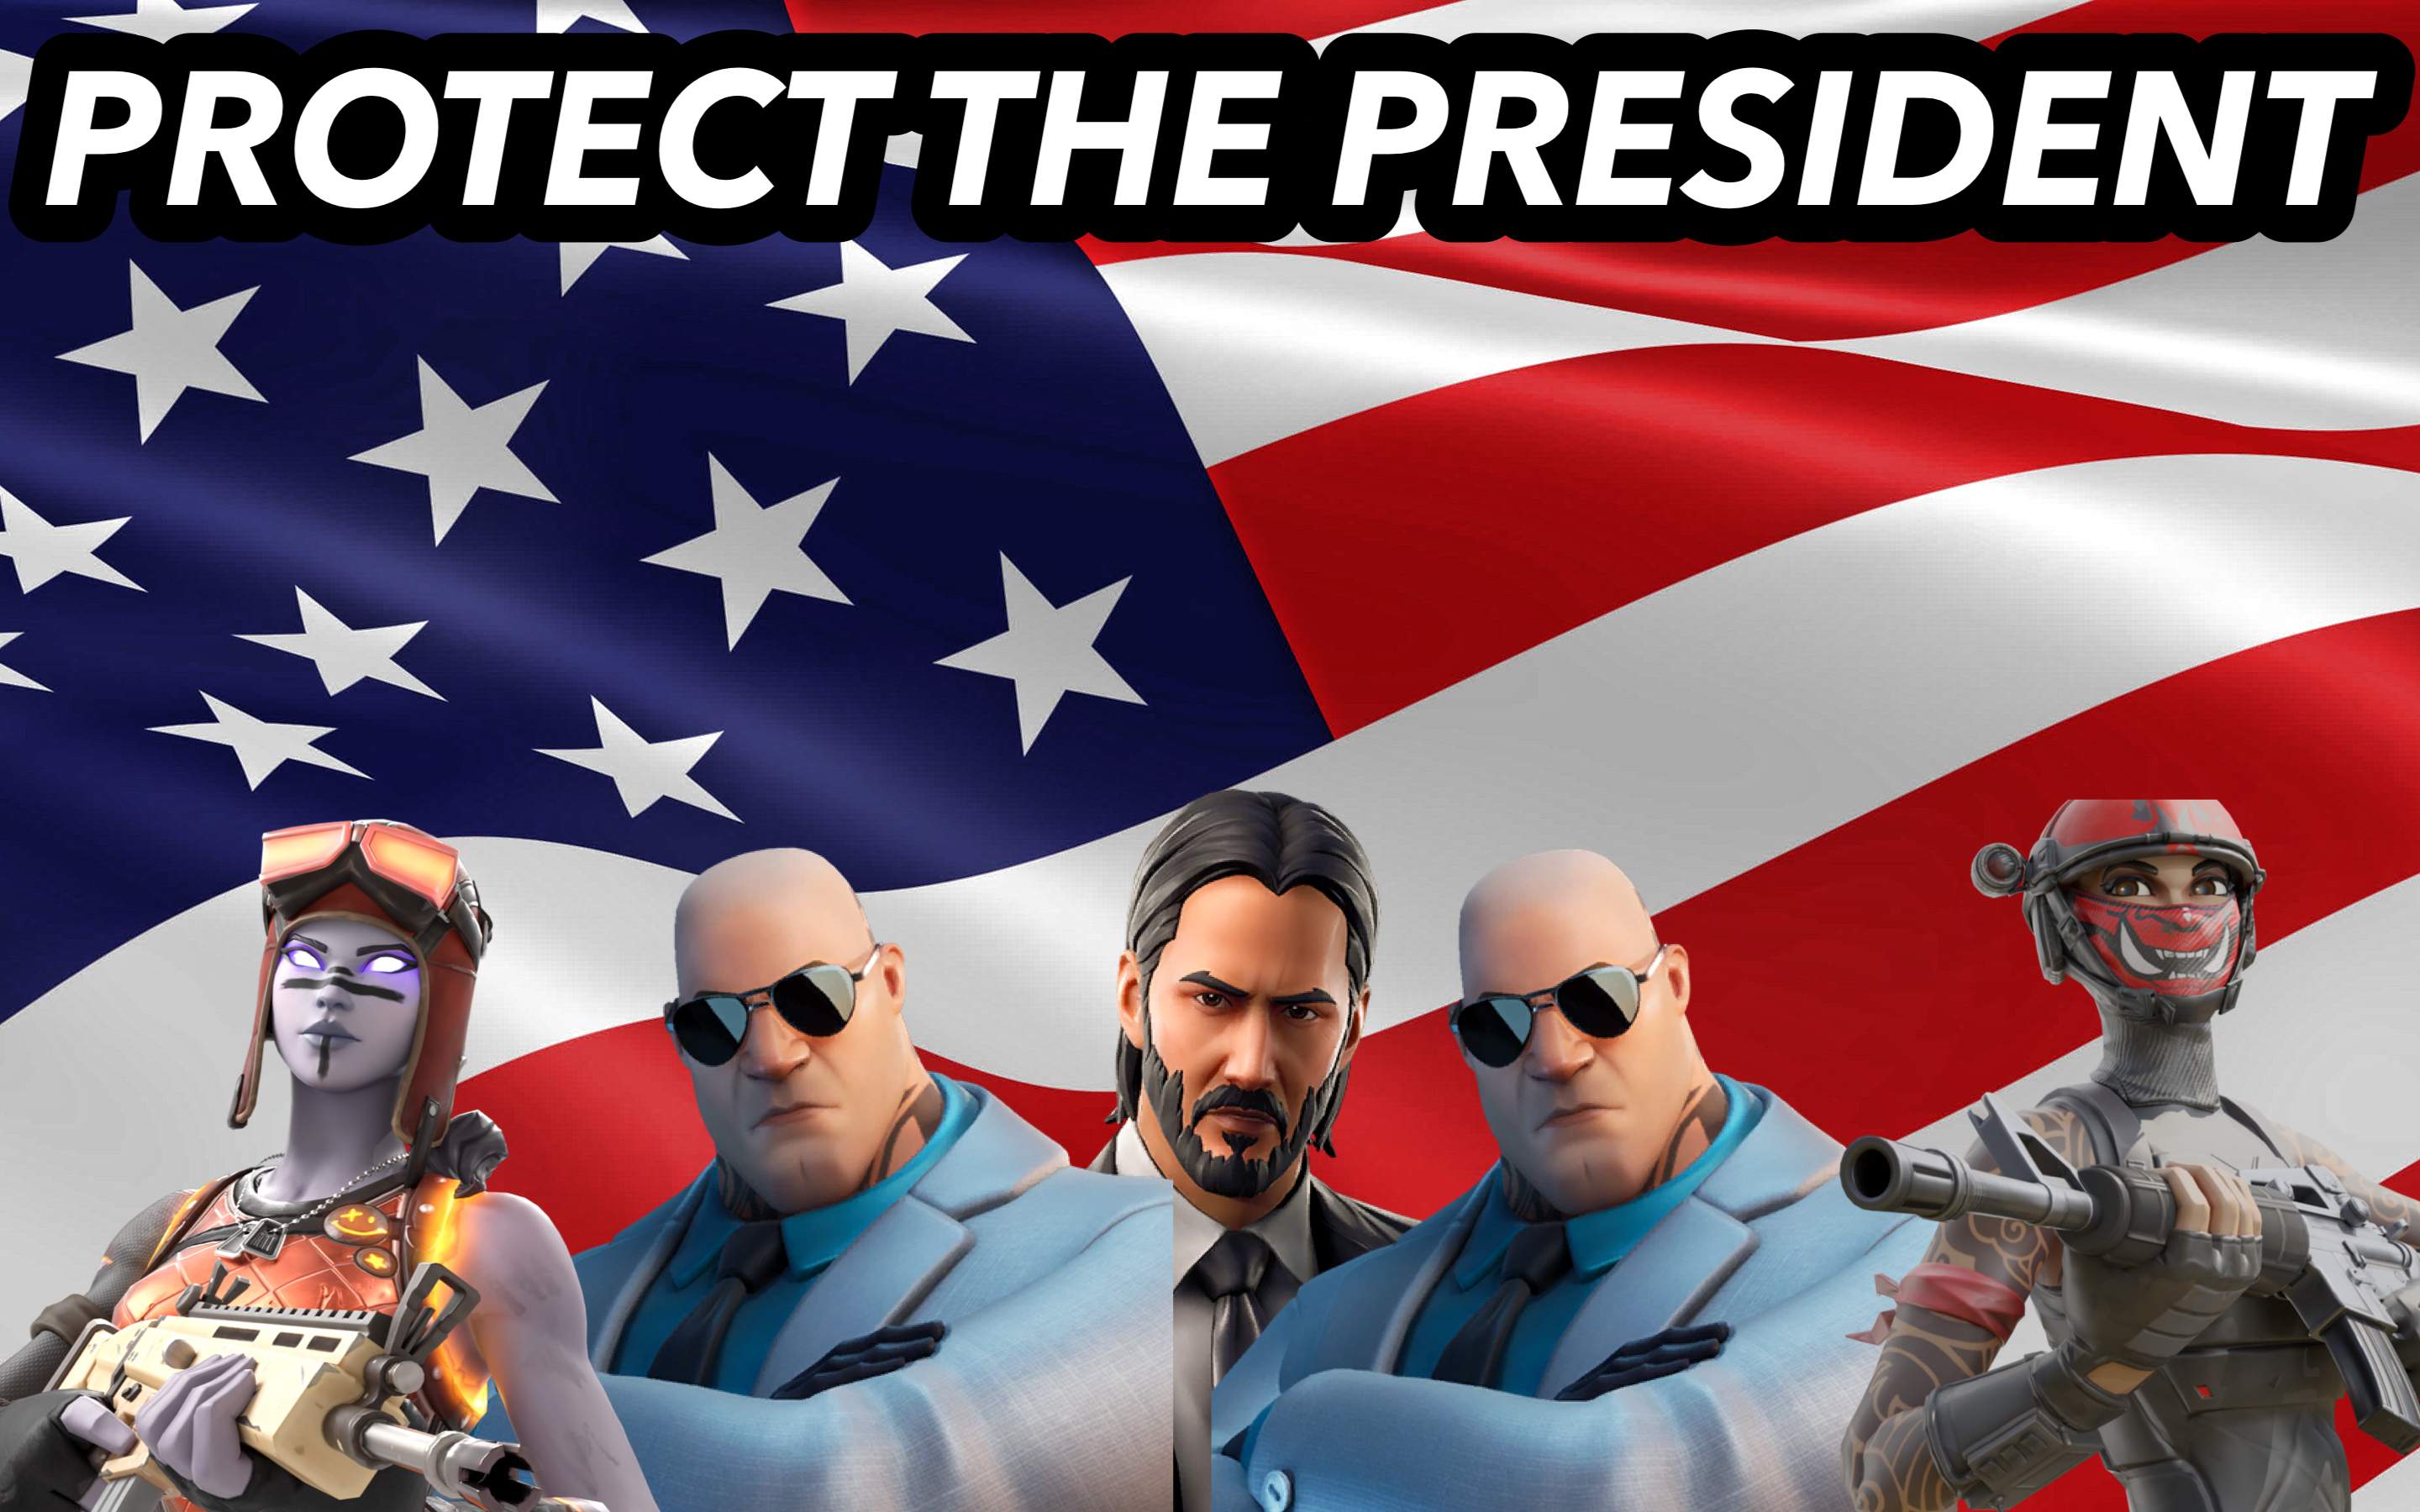 Protect the president